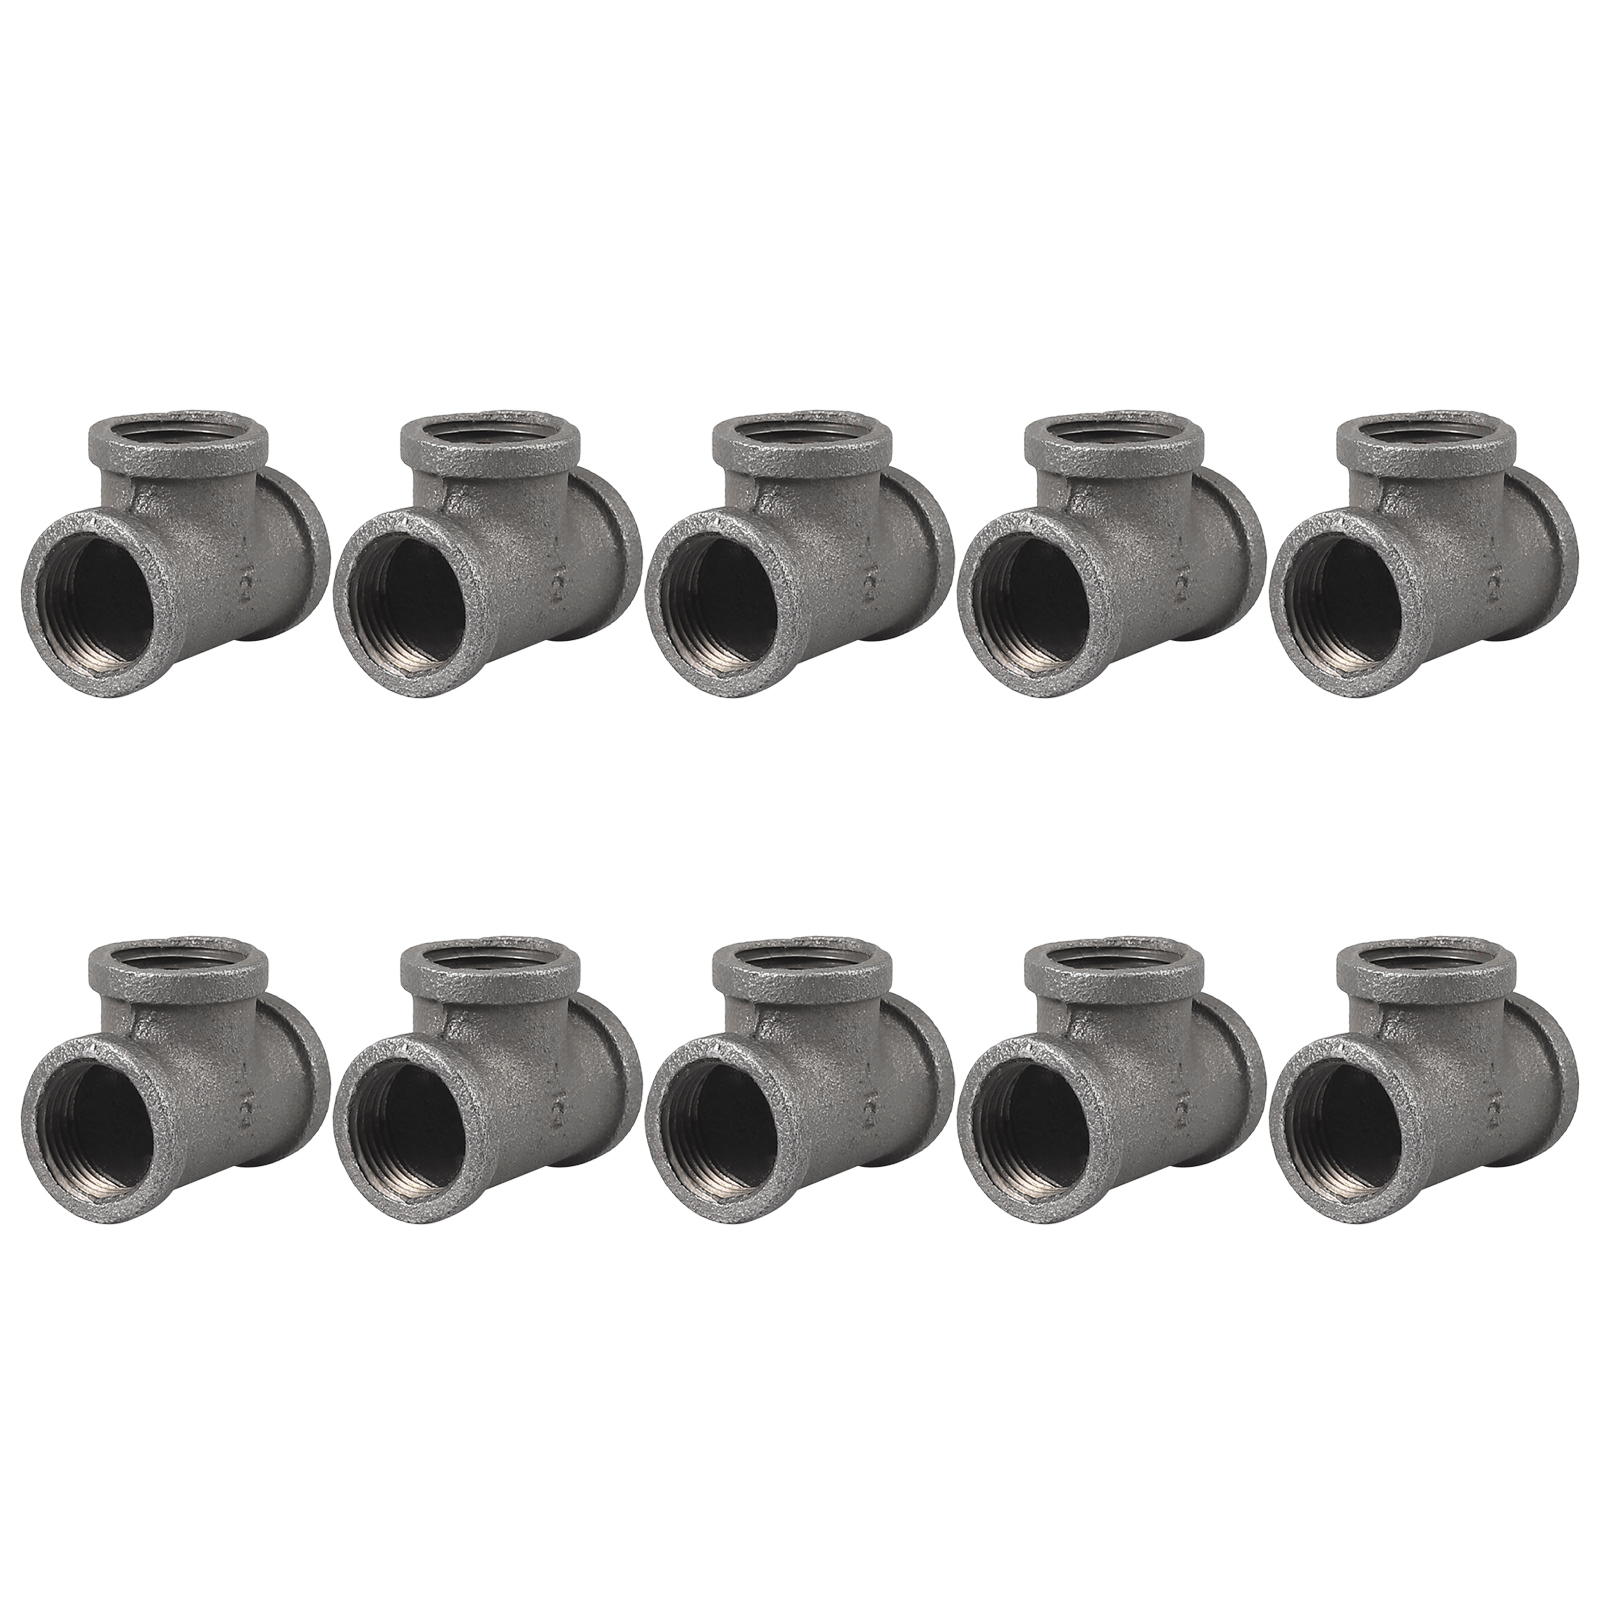 10X Threaded Iron Pipe Fitting Tee head 1/2" Malleable Cast Iron For Bookshelves